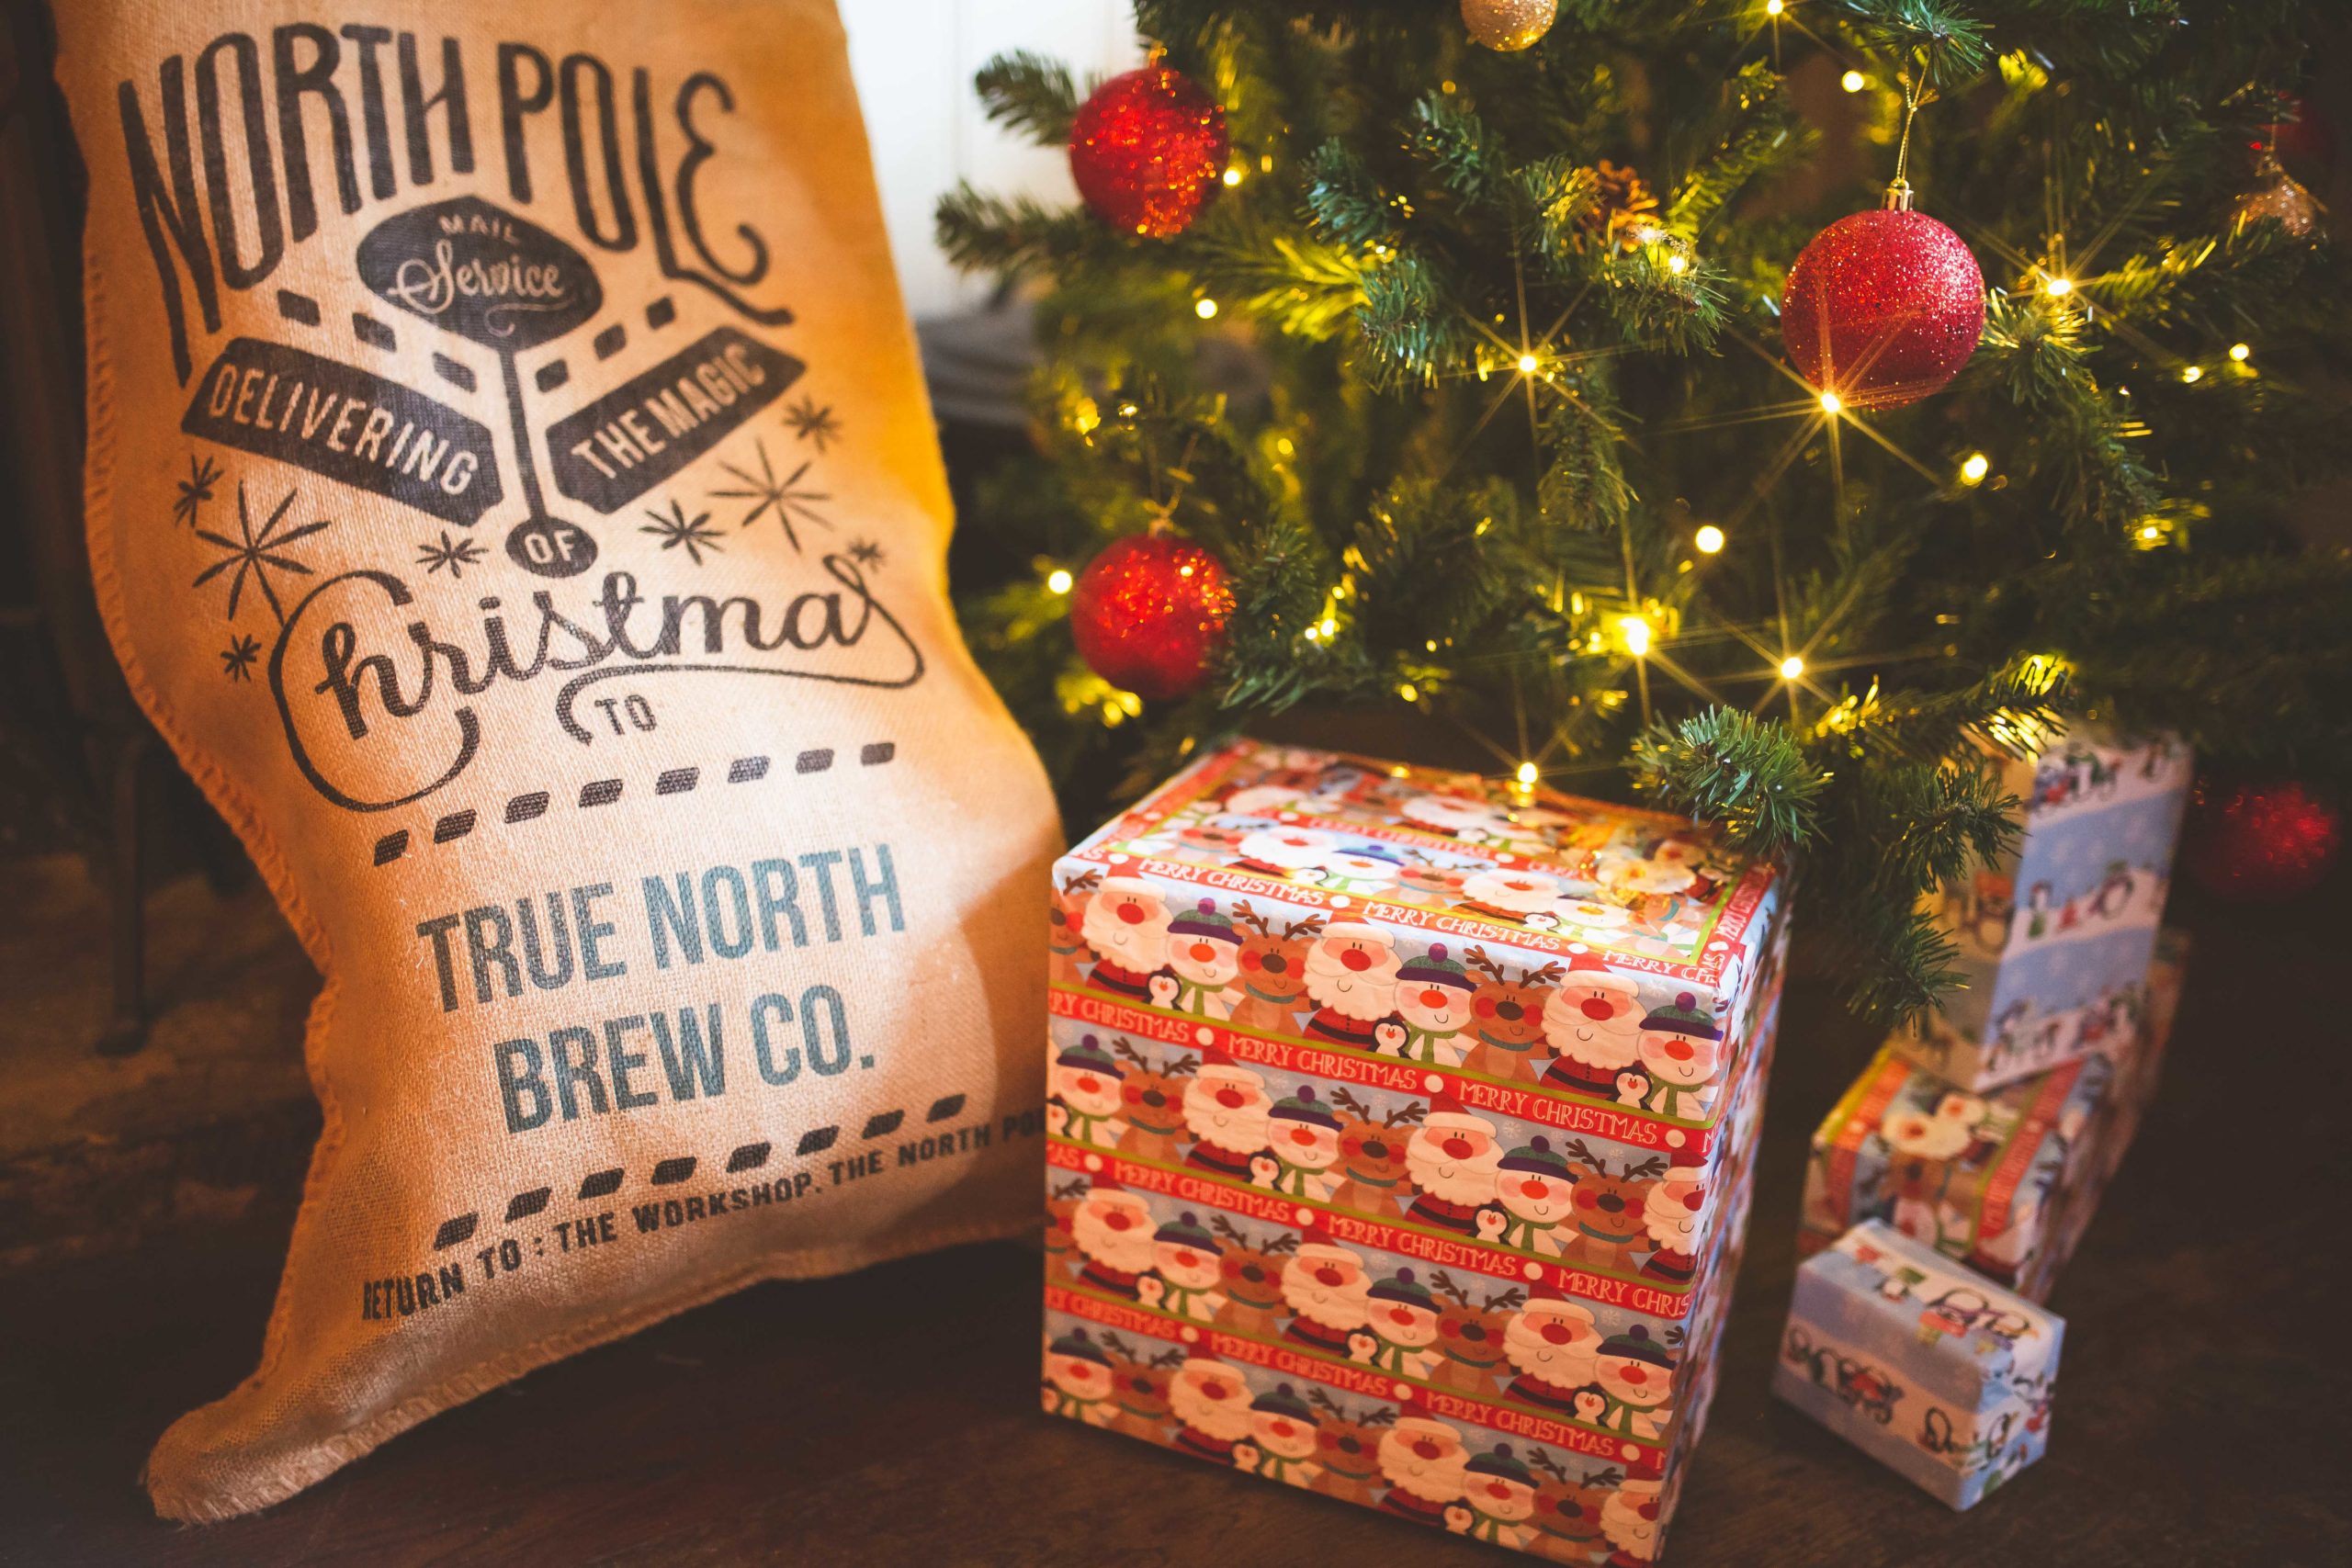 True North Brew Co. Christmas gifts